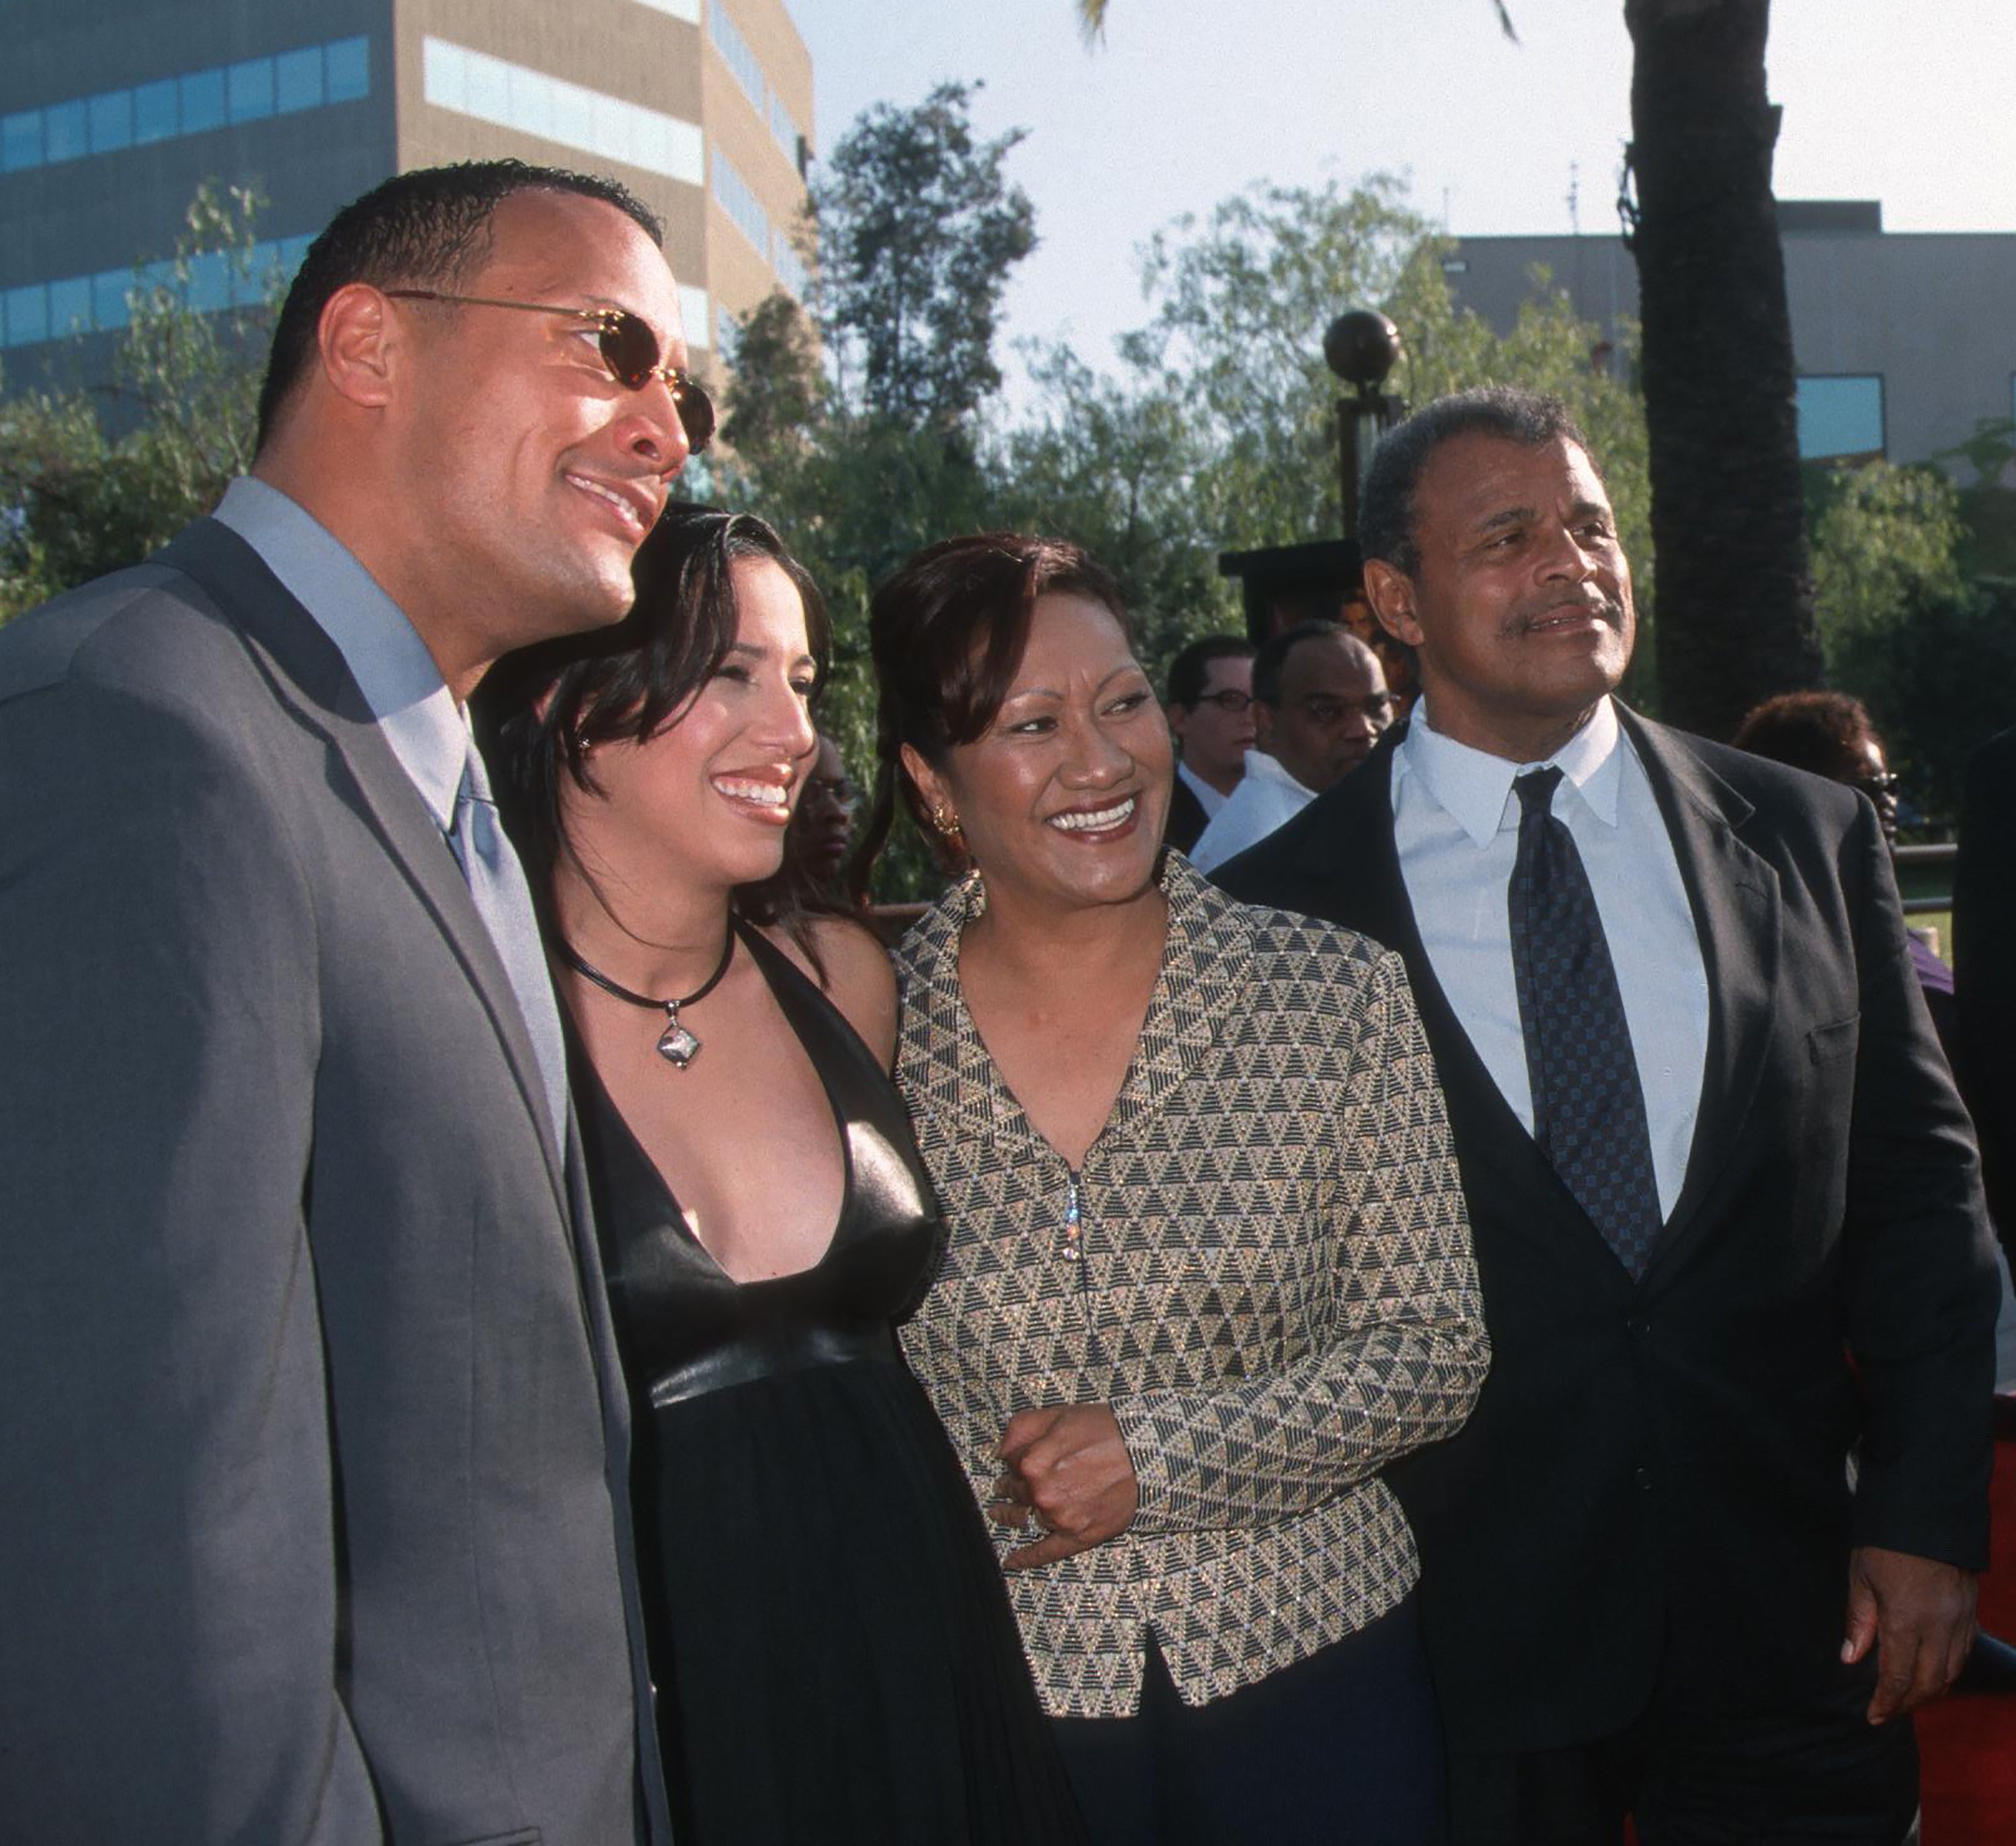 Dwayne Johnson, Dany Johnson (nee Garcia), Ata Johnson (nee Maivia), and Rocky Johnson at the premiere of "The Mummy Returns" in Universal City, California, on April 29, 2001 | Source: Getty Images